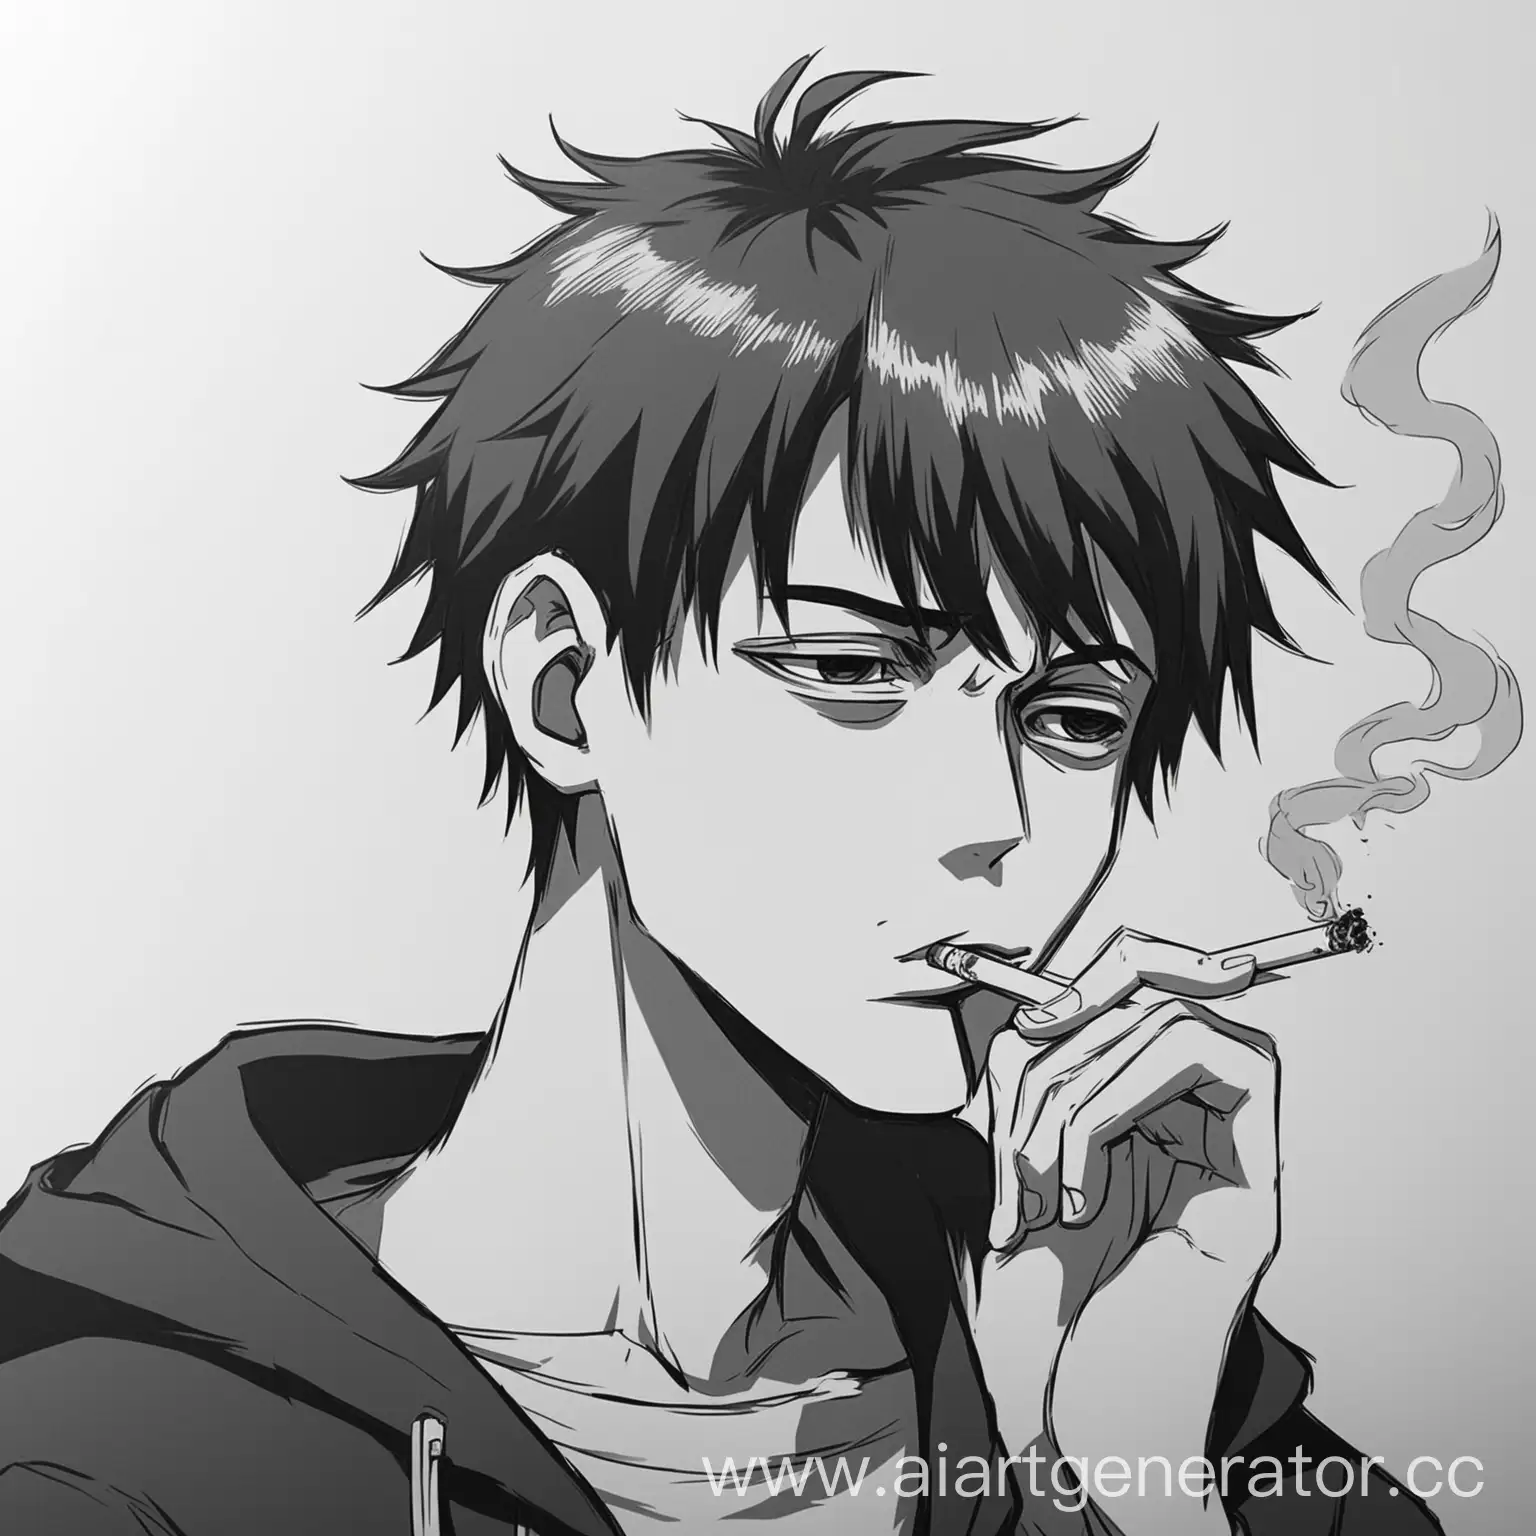 Anime-Style-Black-and-White-Drawing-of-a-Sad-Guy-with-Cigarette